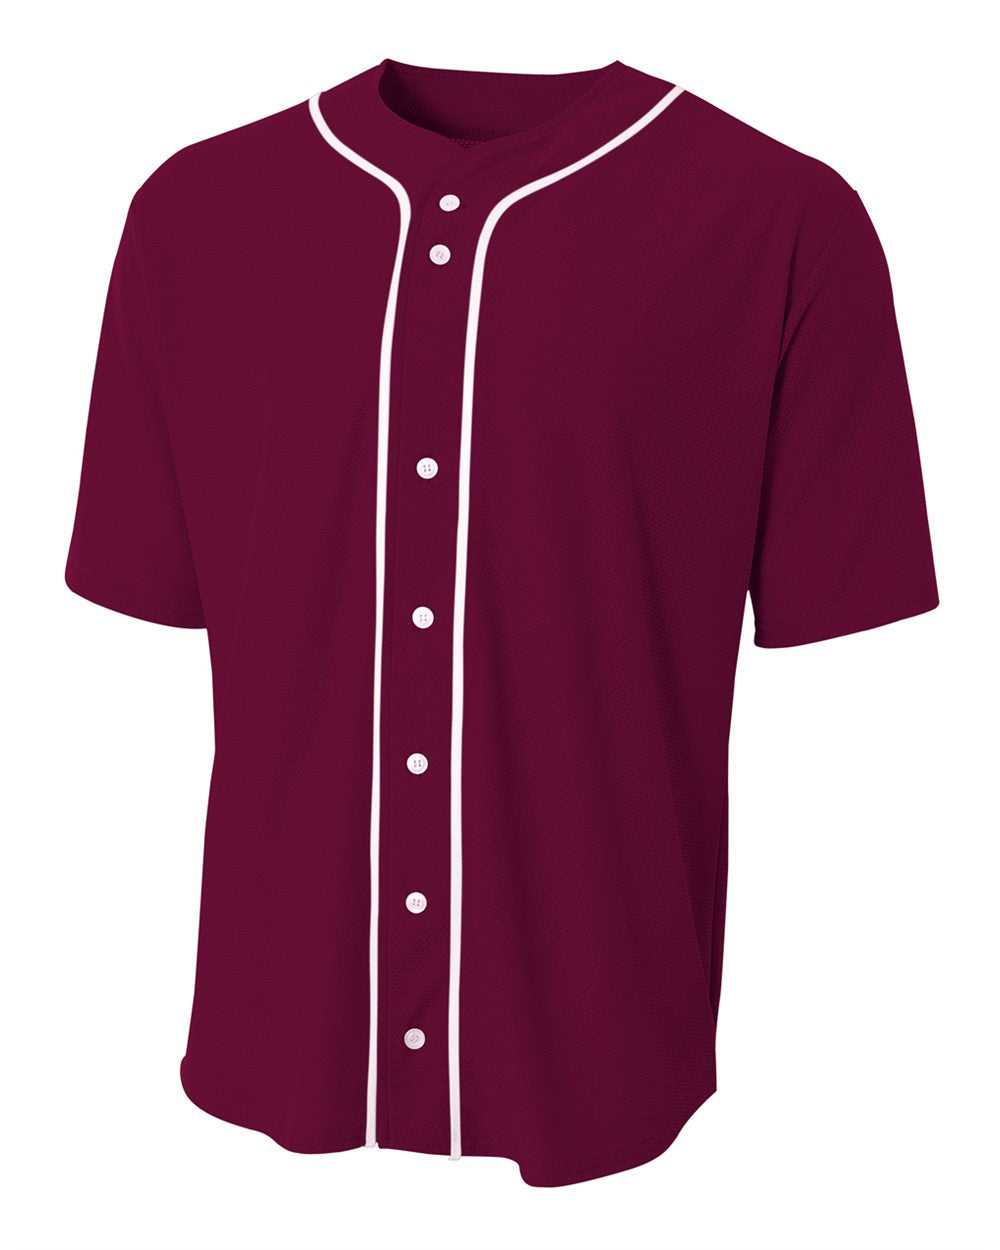 A4 N4184 Short Sleeve Full Button Baseball Top - Maroon White - HIT a Double